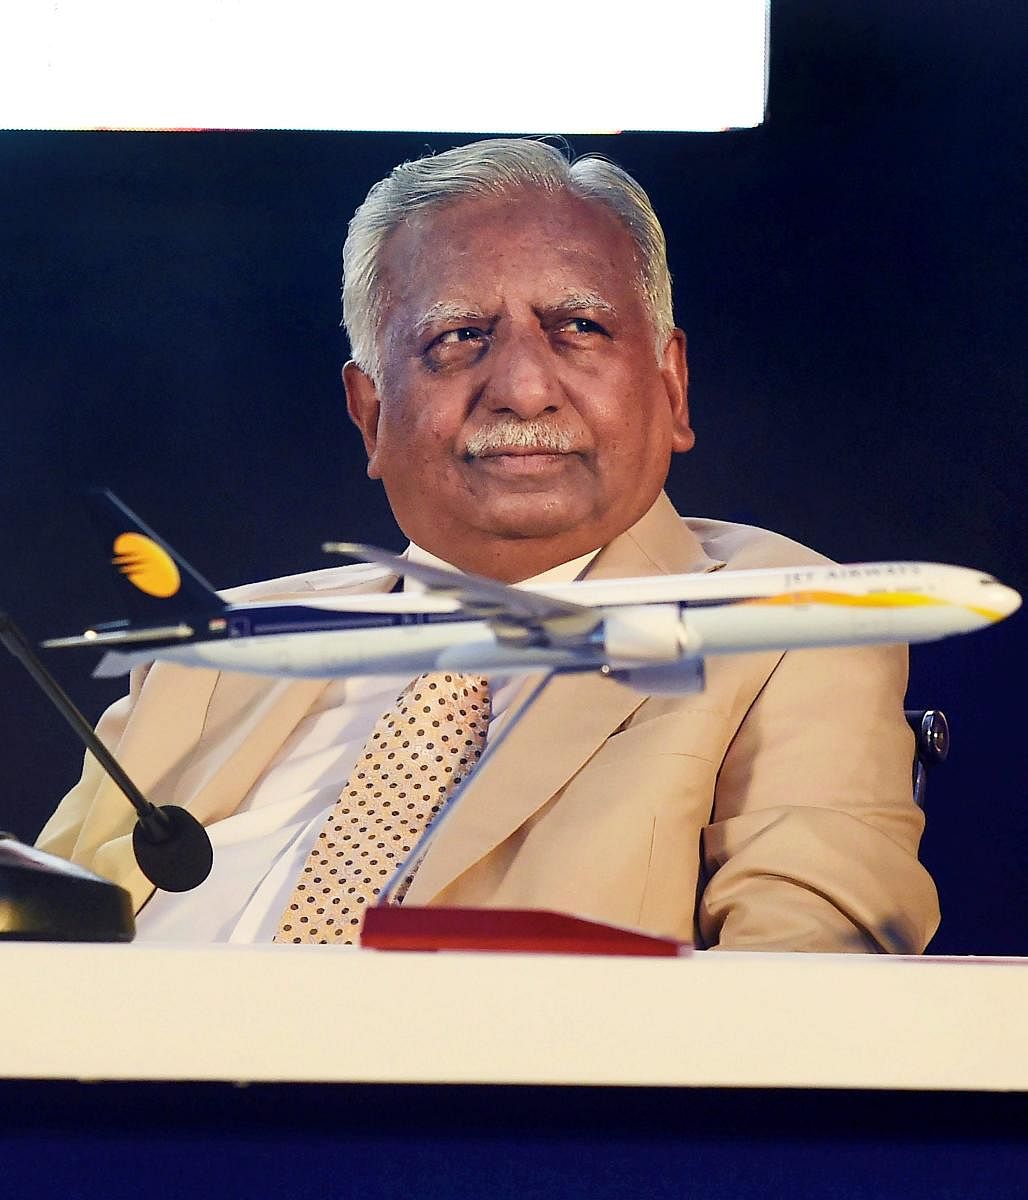 **FILE** Mumbai: In this file photo dated Nov 29, 2017, Naresh Goyal, Chairman of Jet Airways during the signing of 'Enhanced Cooperation Agreement' between Air France-KLM and Jet Airways, in Mumbai. Goyal and his wife will step down from the board of the ailing airline, which will also receive immediate funding of Rs 1,500 crore under a resolution plan piloted by its lenders. (PTI Photo/Mitesh Bhuvad)(PTI3_25_2019_000100B)